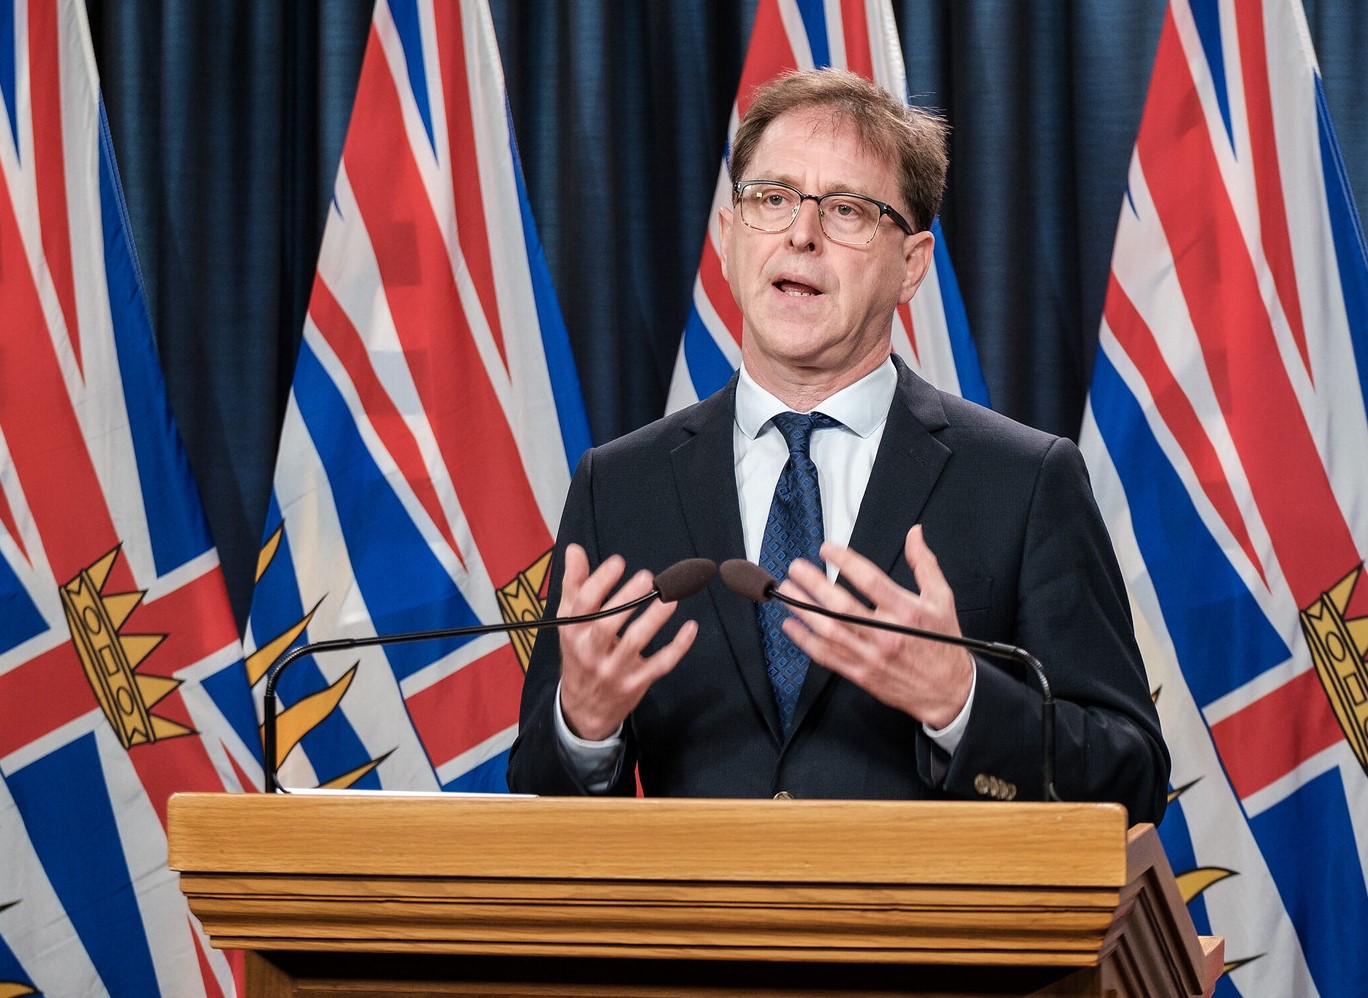 A man in a suit speaks at a conference in front of multiple flags for the Canadian province of British Columbia.